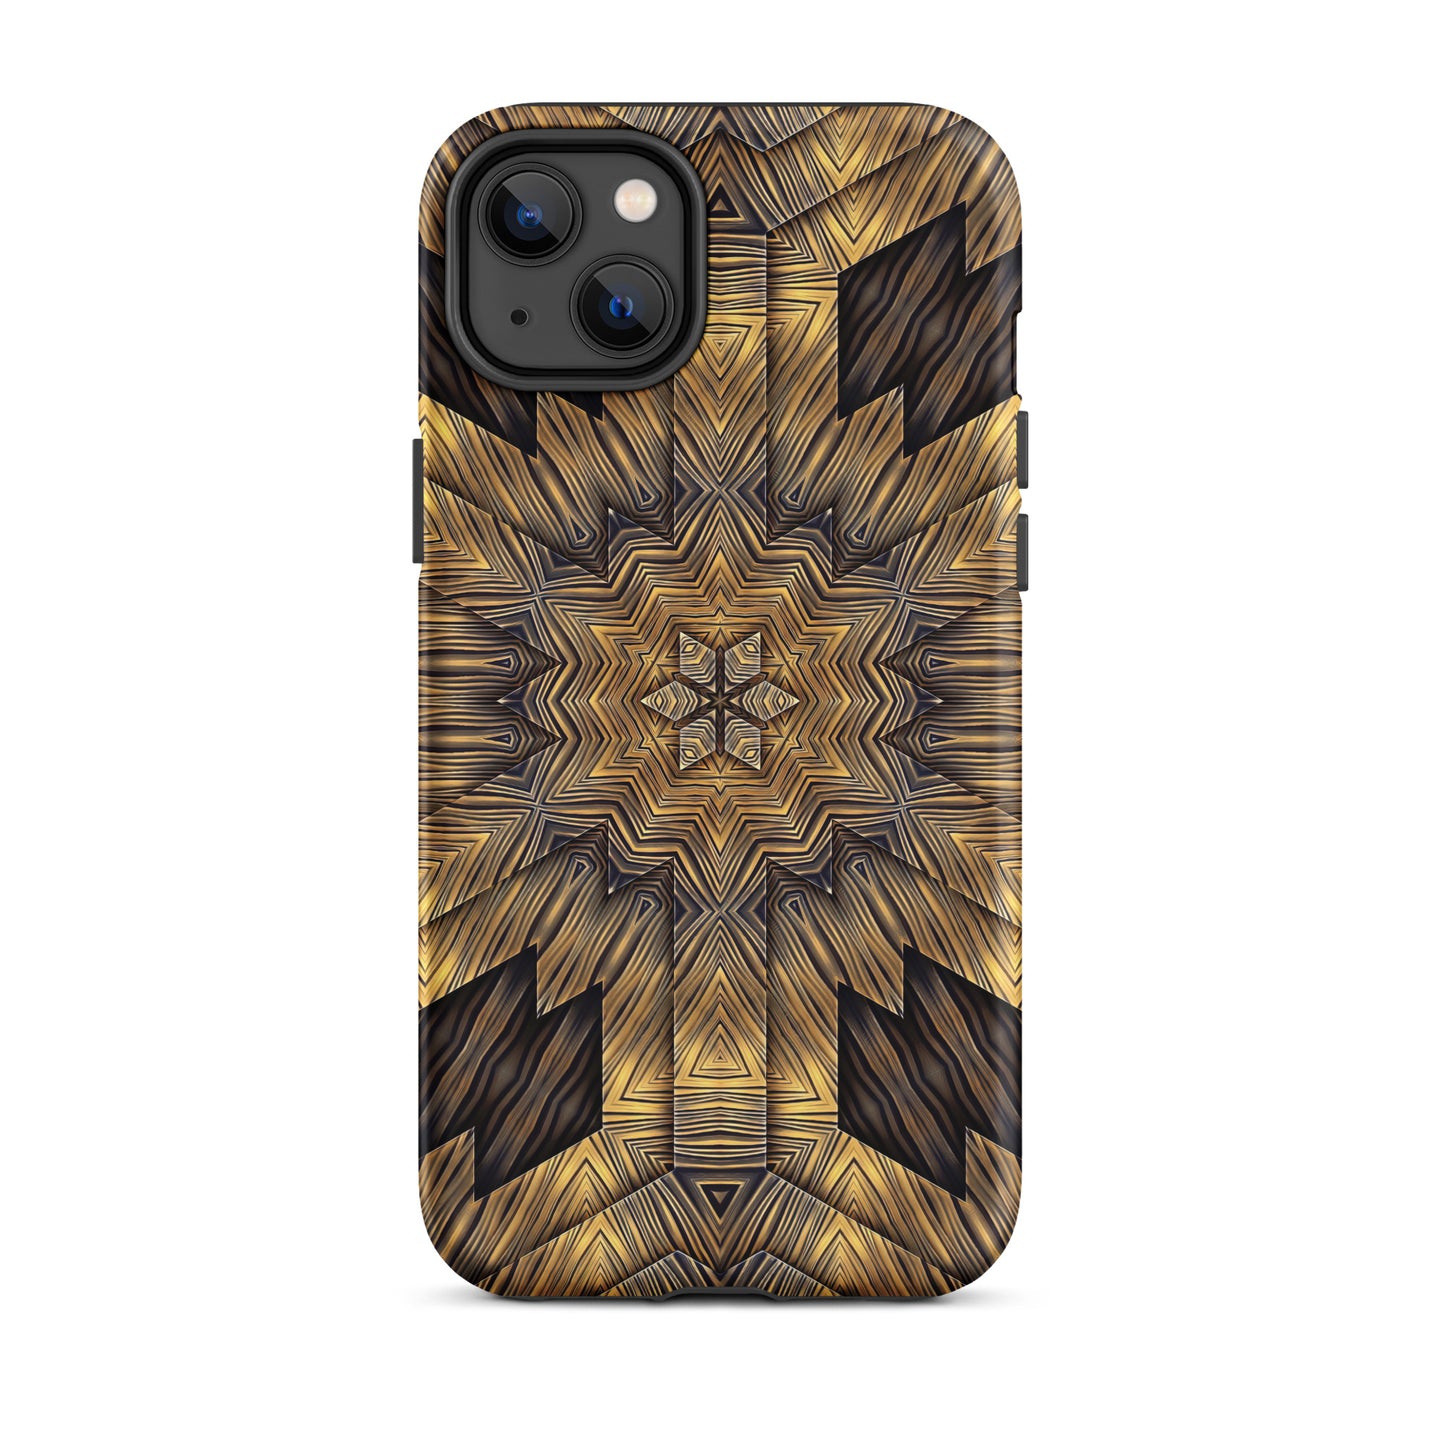 "You Wood Say That" iCanvas Tough iPhone case